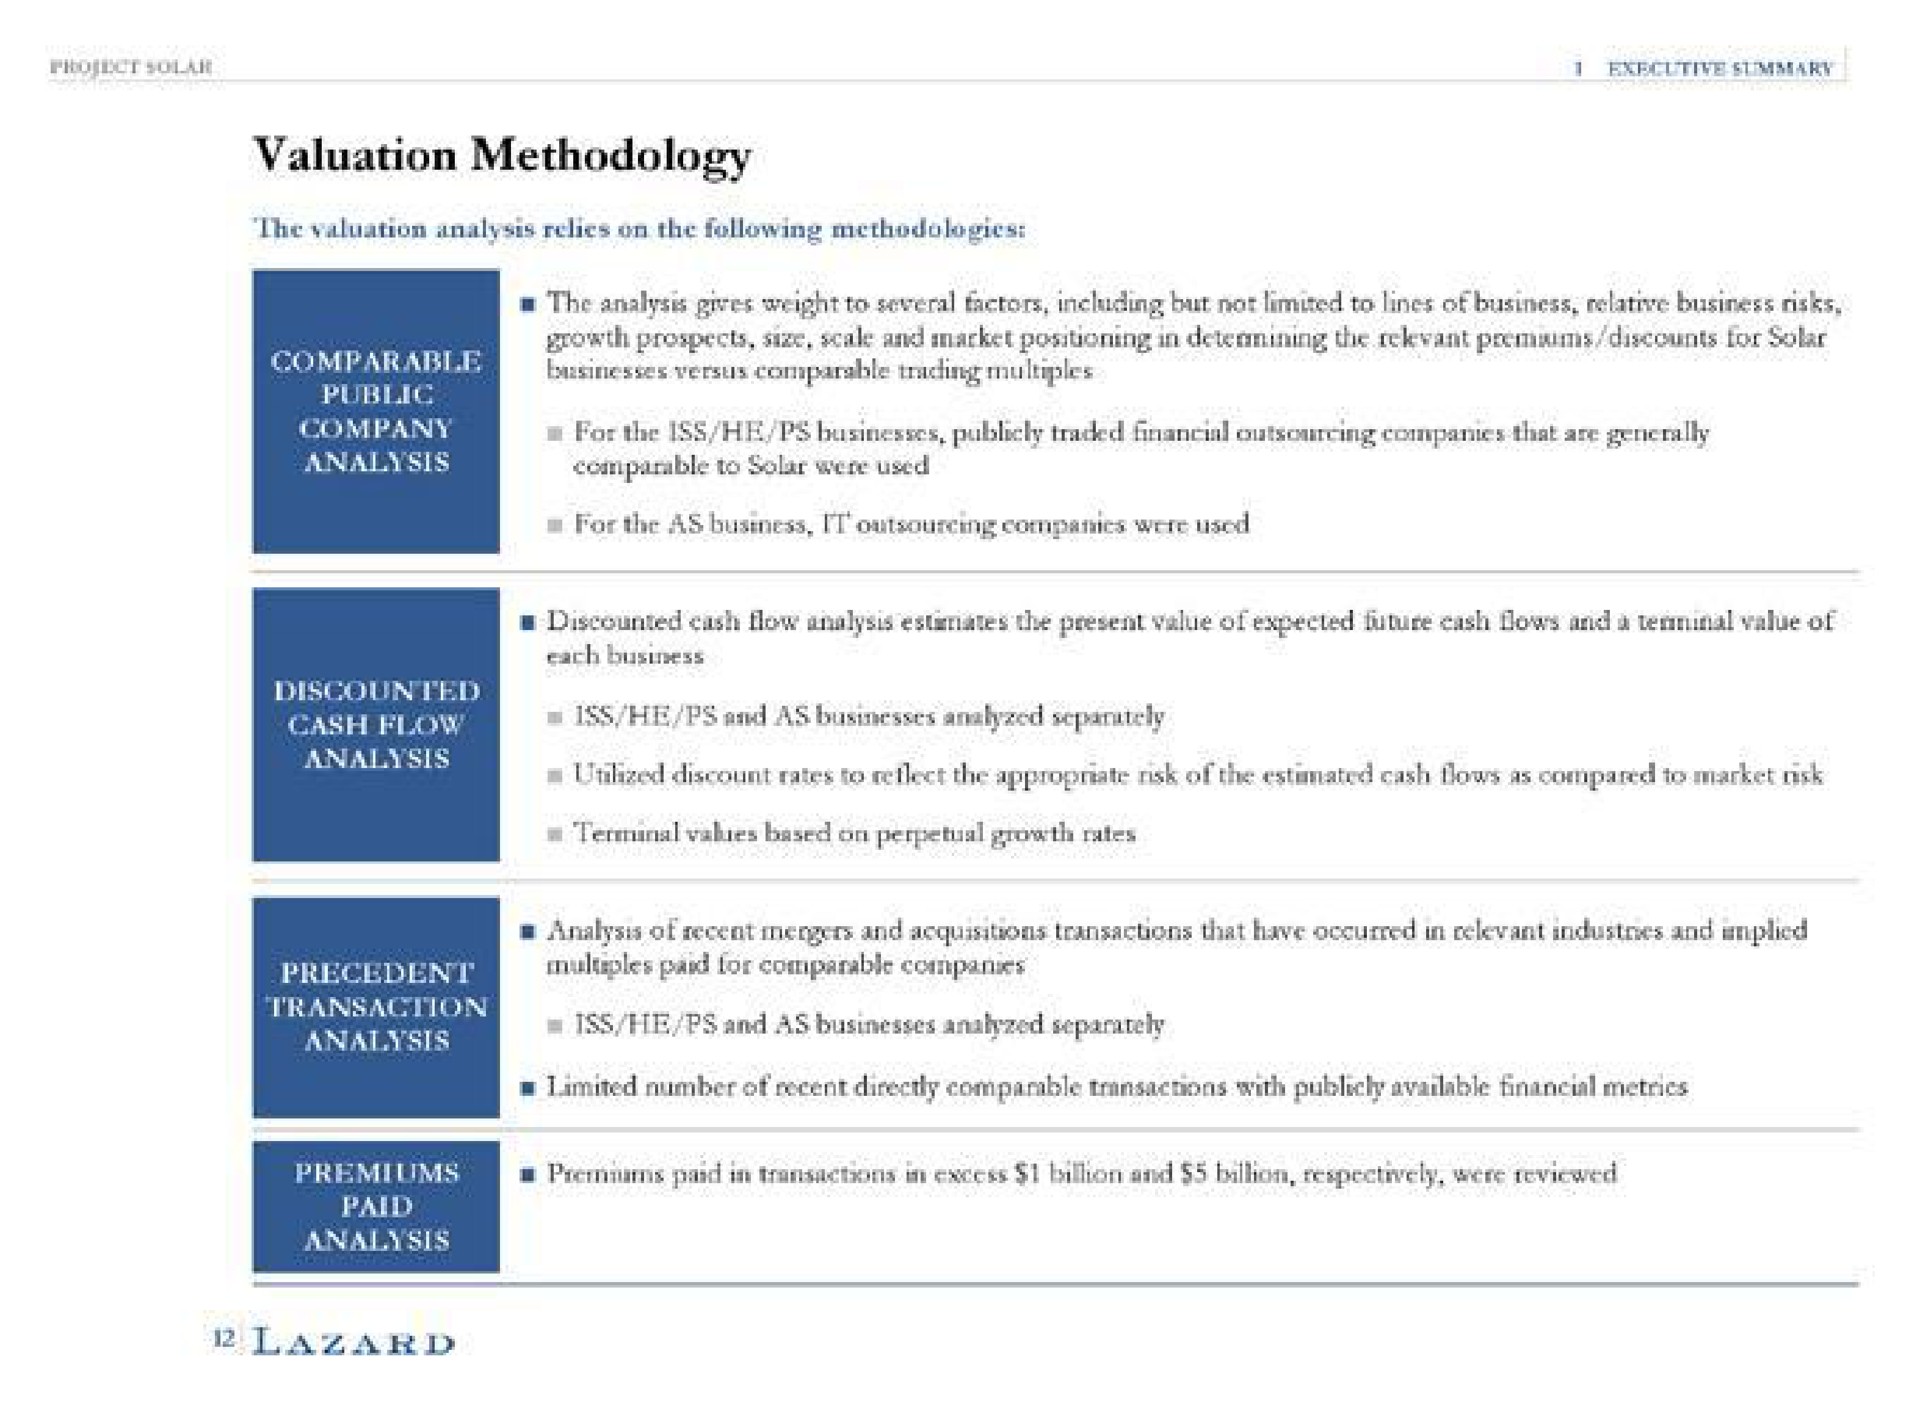 valuation methodology paid in transactions in excess billion and billion respectively were reviewed | Lazard